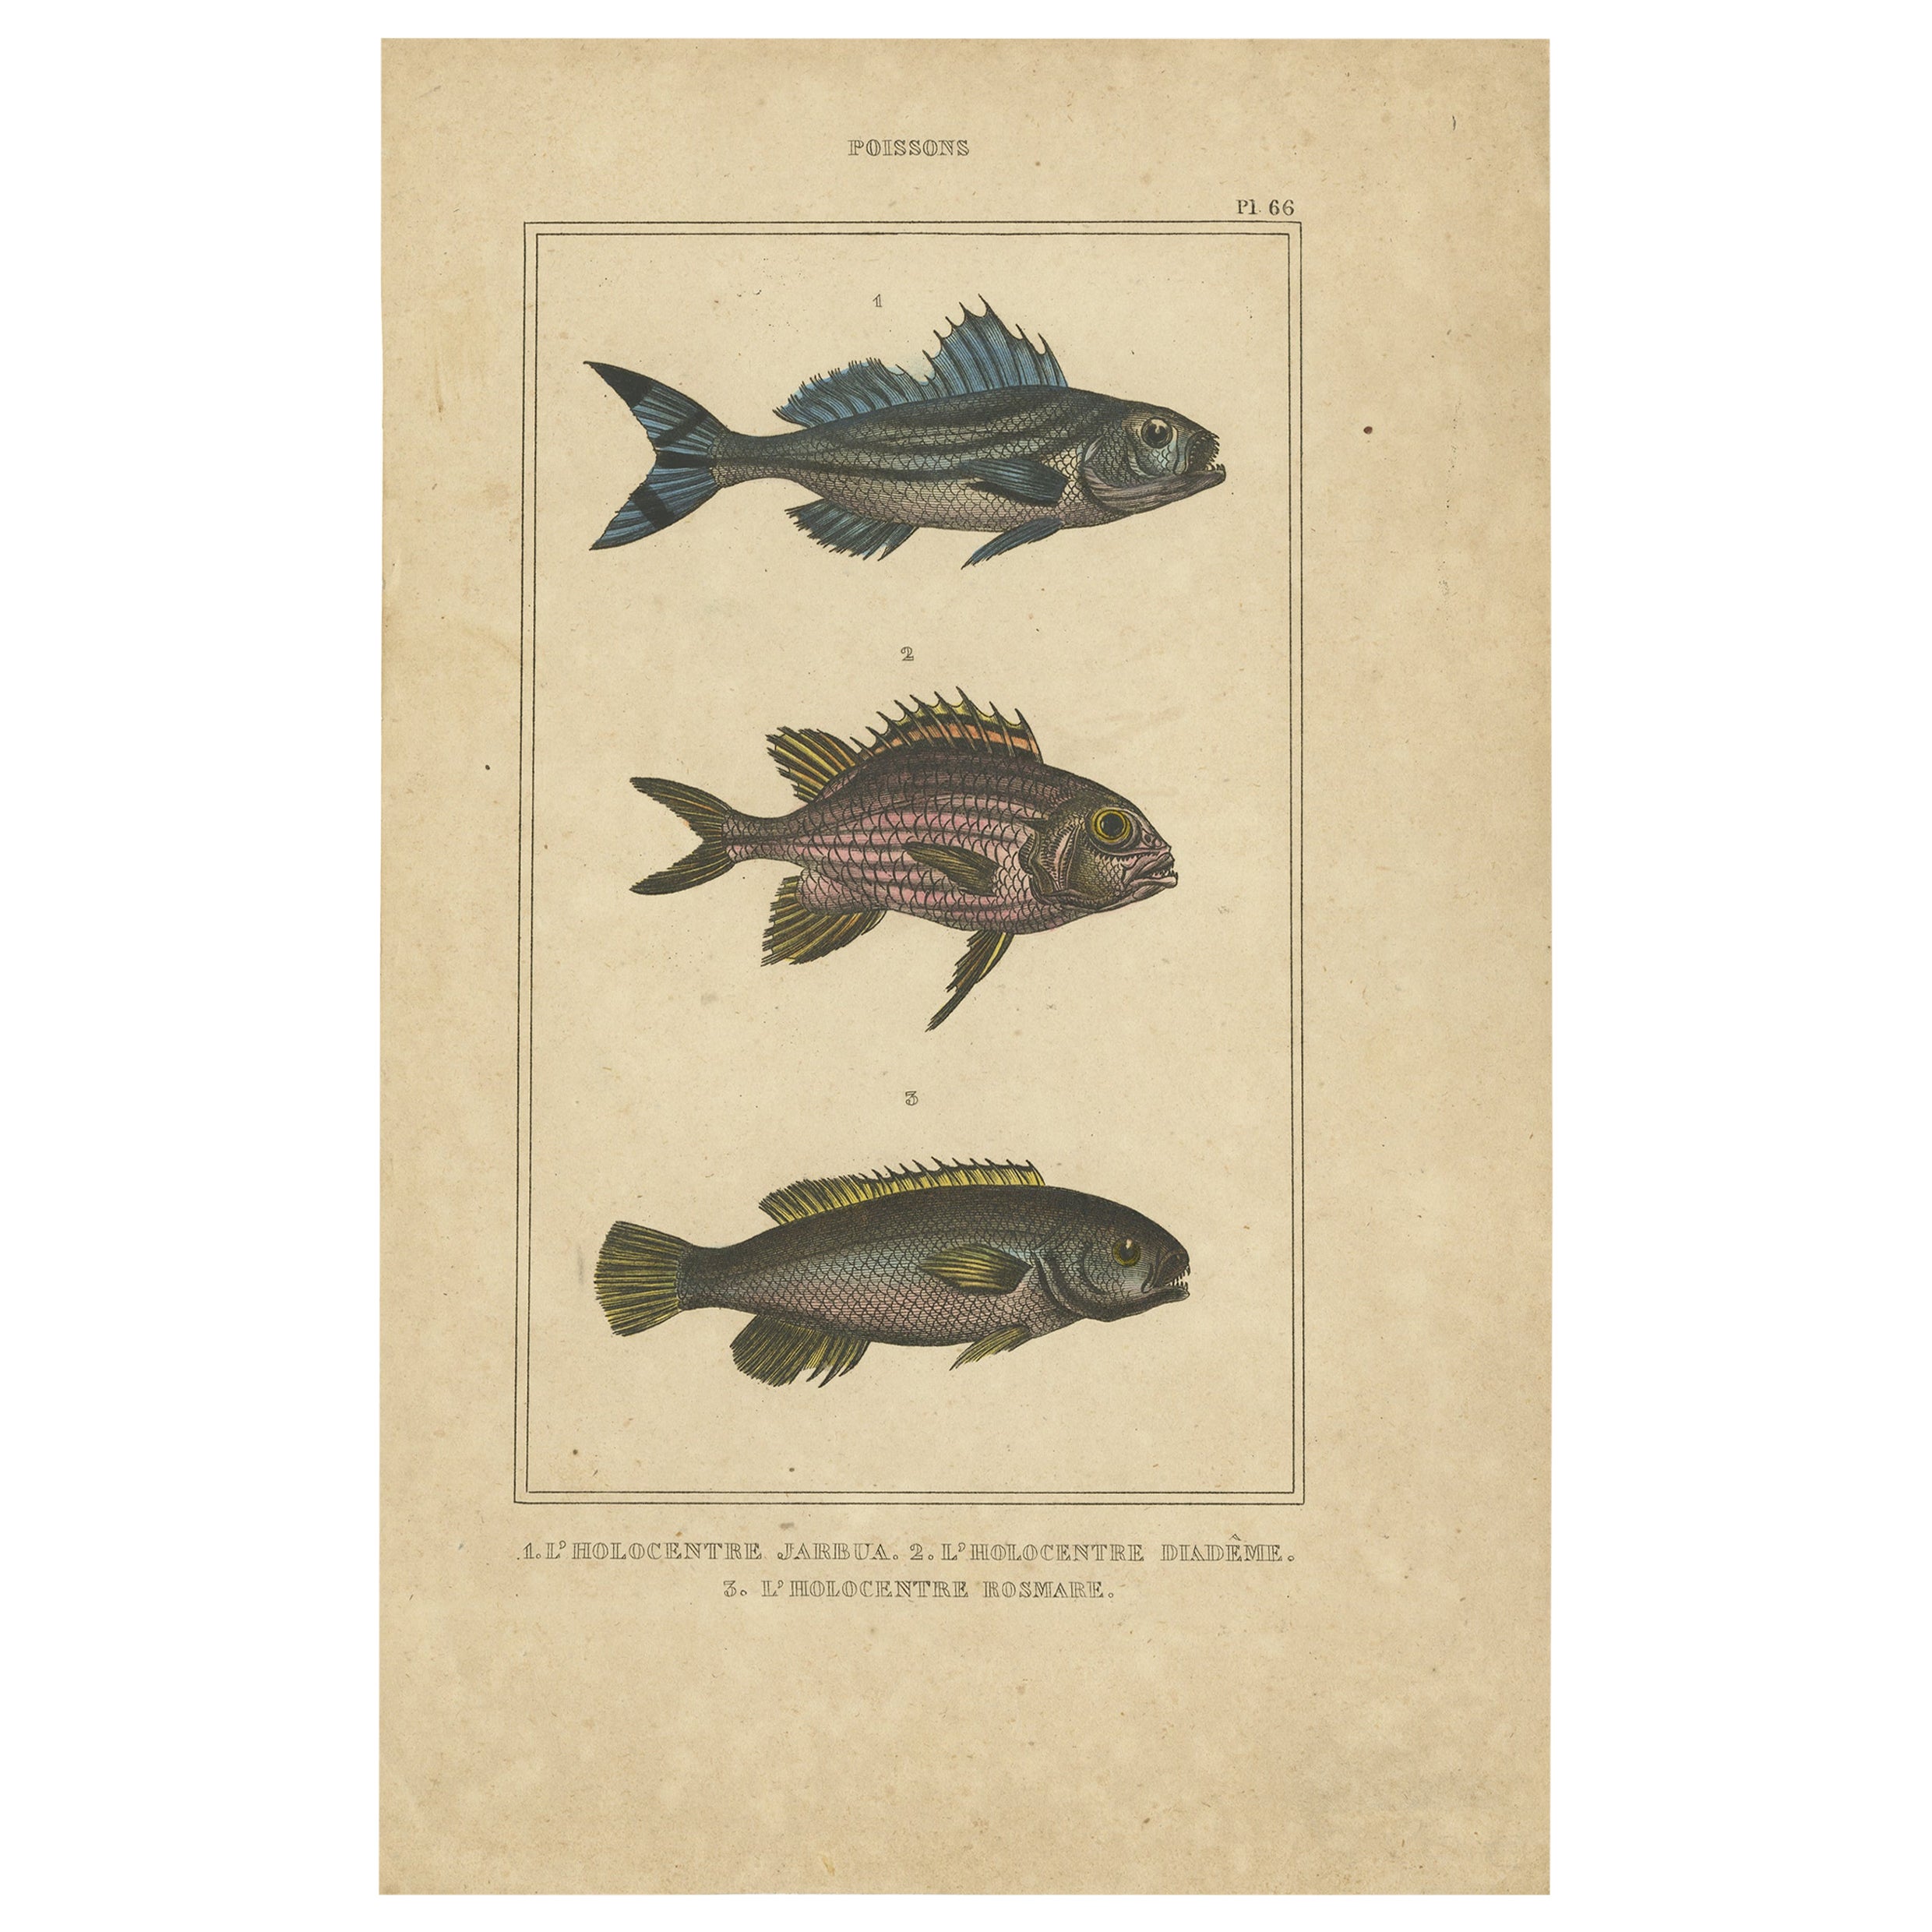 Antique Print of the Crowned Squirrelfish and Other Fish Species, 1844 For Sale